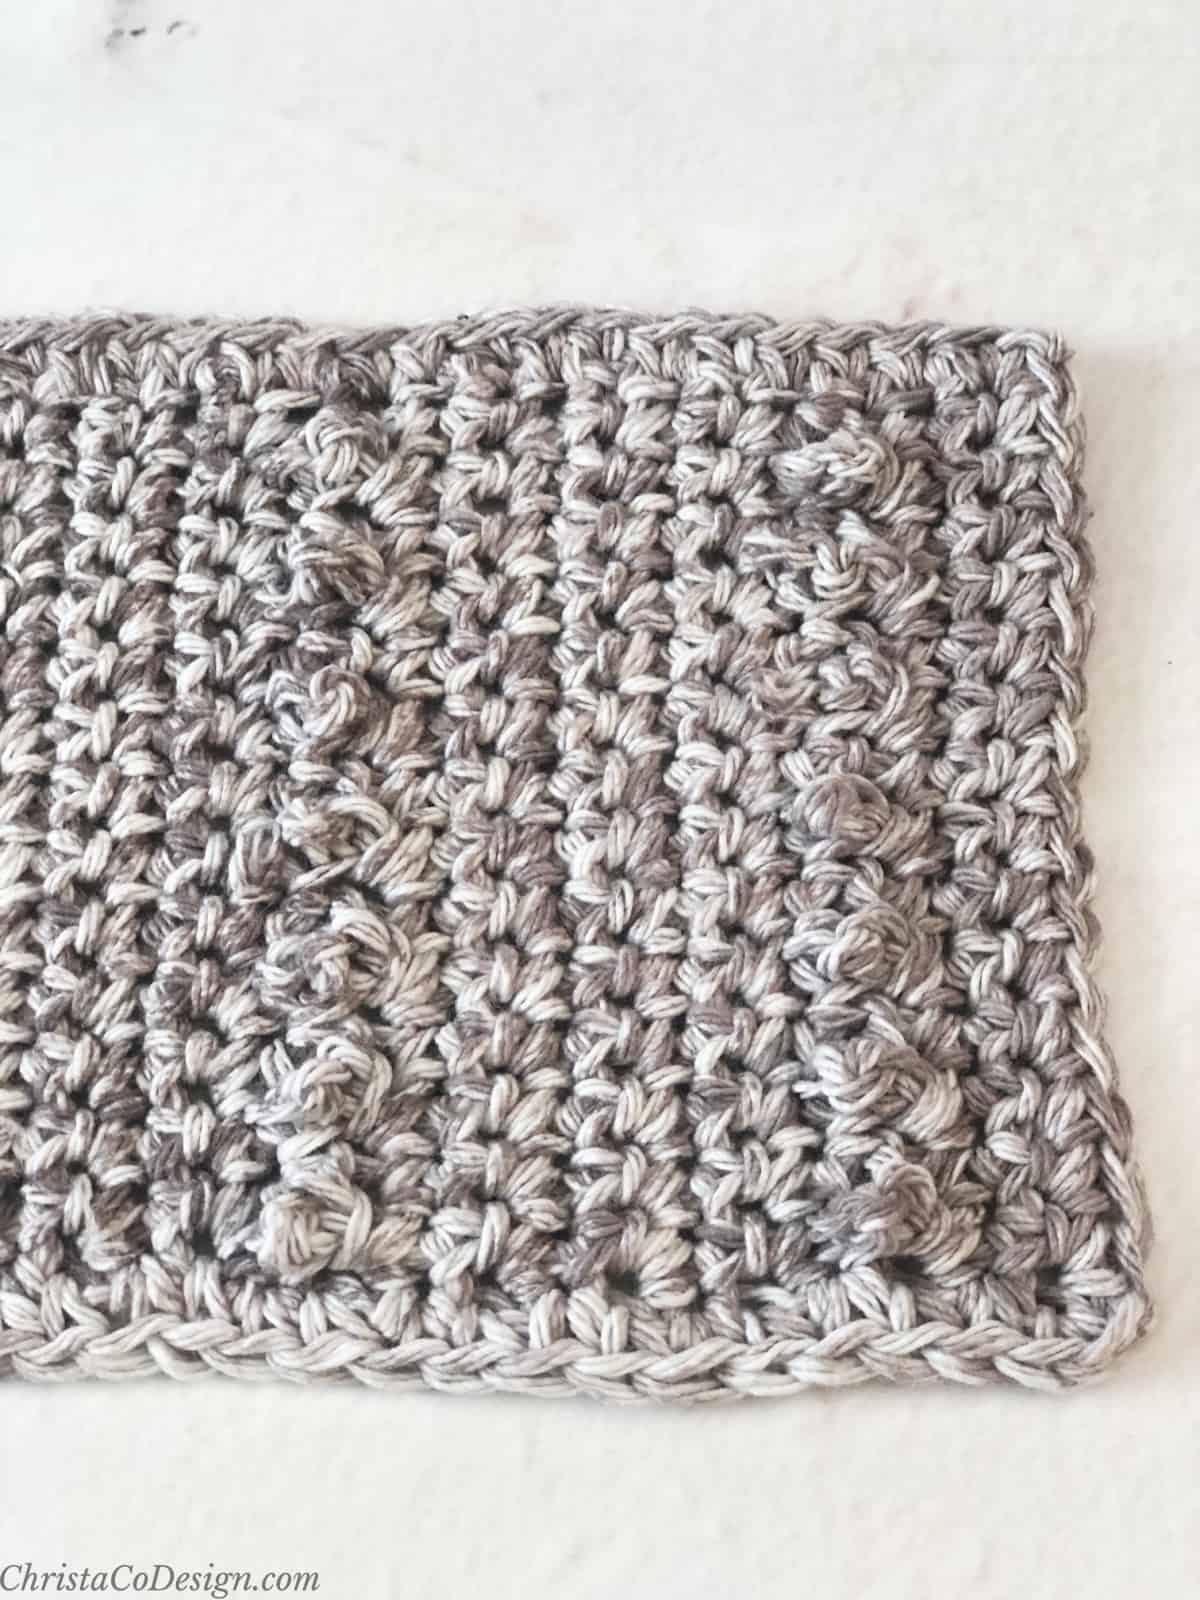 Close up of crochet mug rug with spoon area in grey mottled yarn.